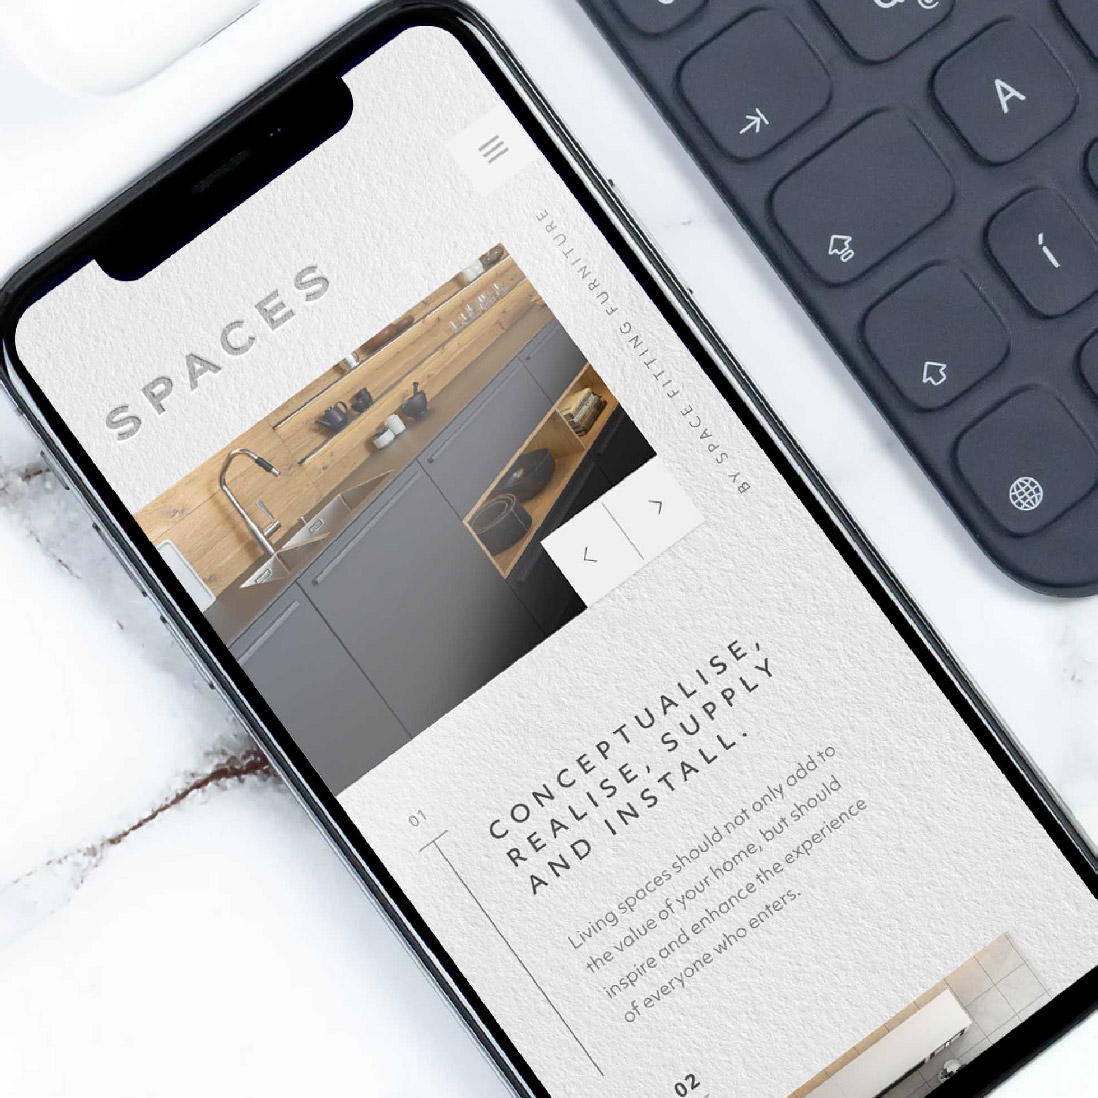 A smartphone displaying a kitchen design website, resting on a white marble surface next to a black keyboard. The phone screen features modern kitchen interiors by Design Agency UK.